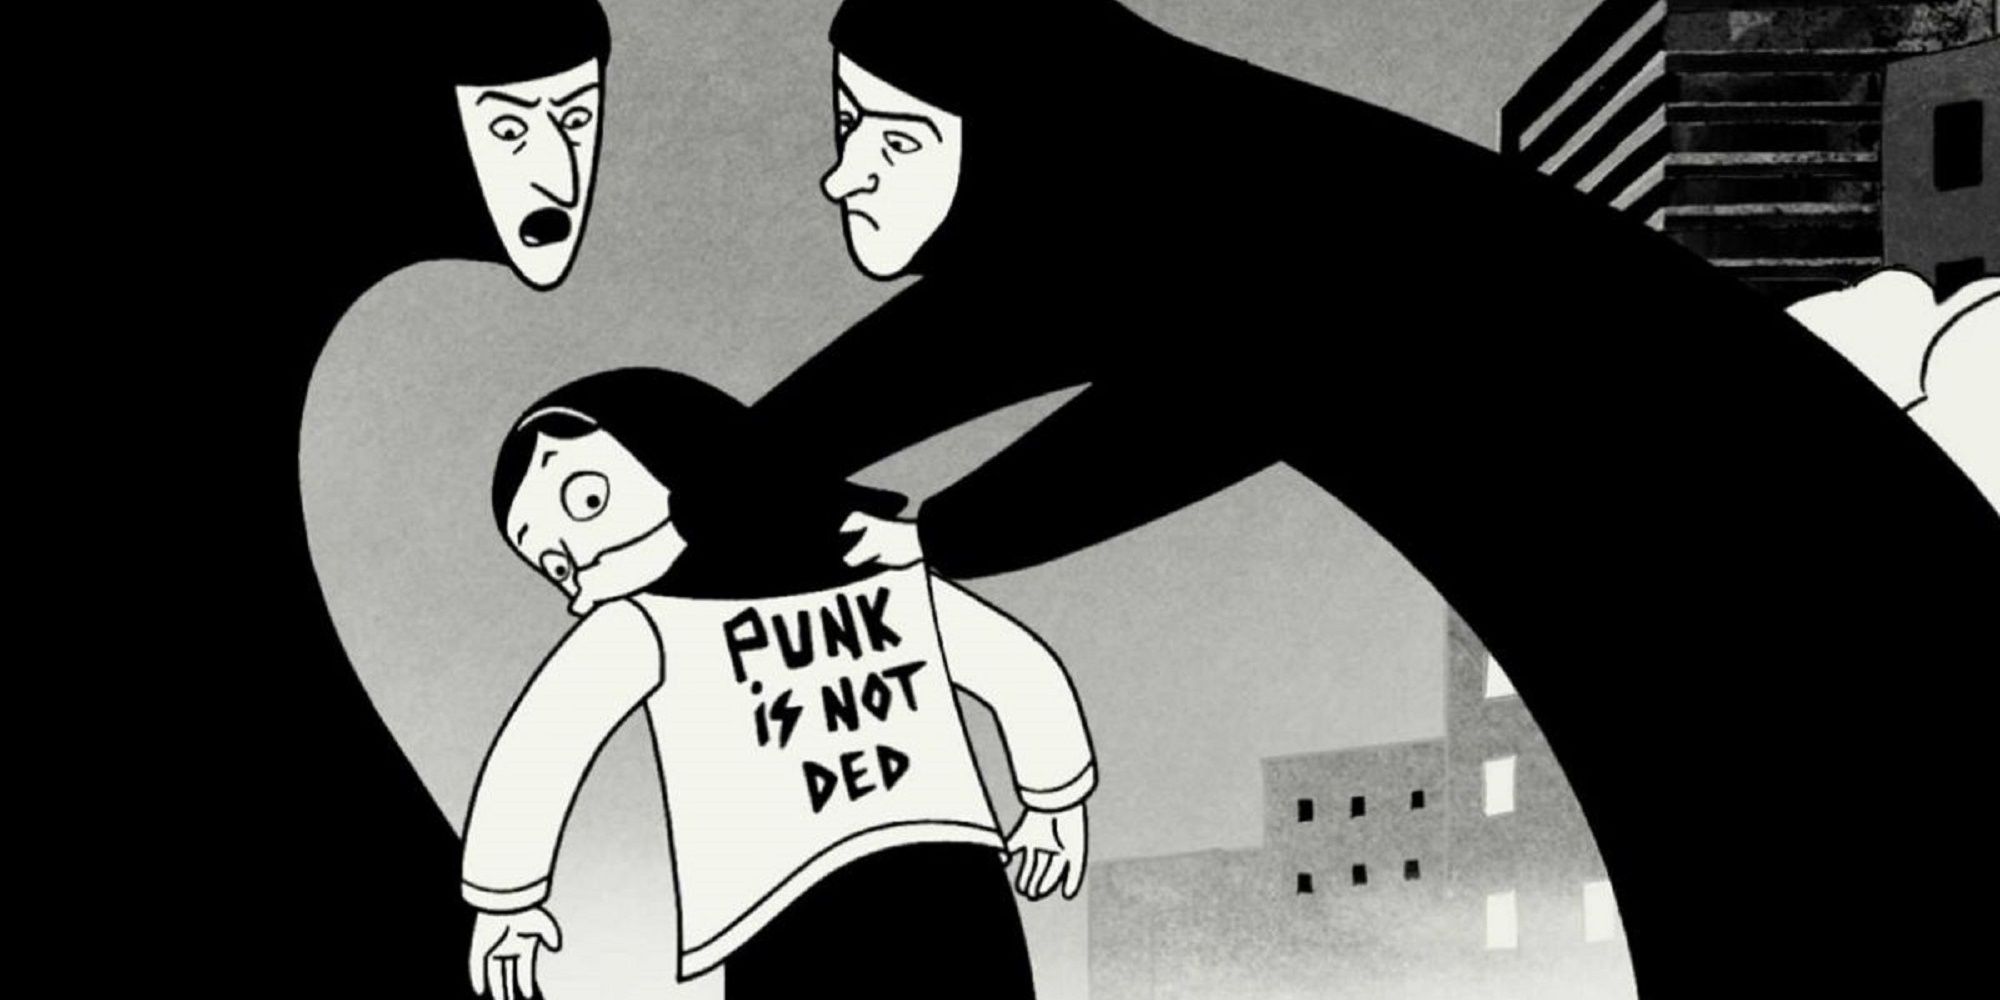 Persepolis wearing her Punk Is Not Ded jacket and being reprehended by two women in the film Persepolis.